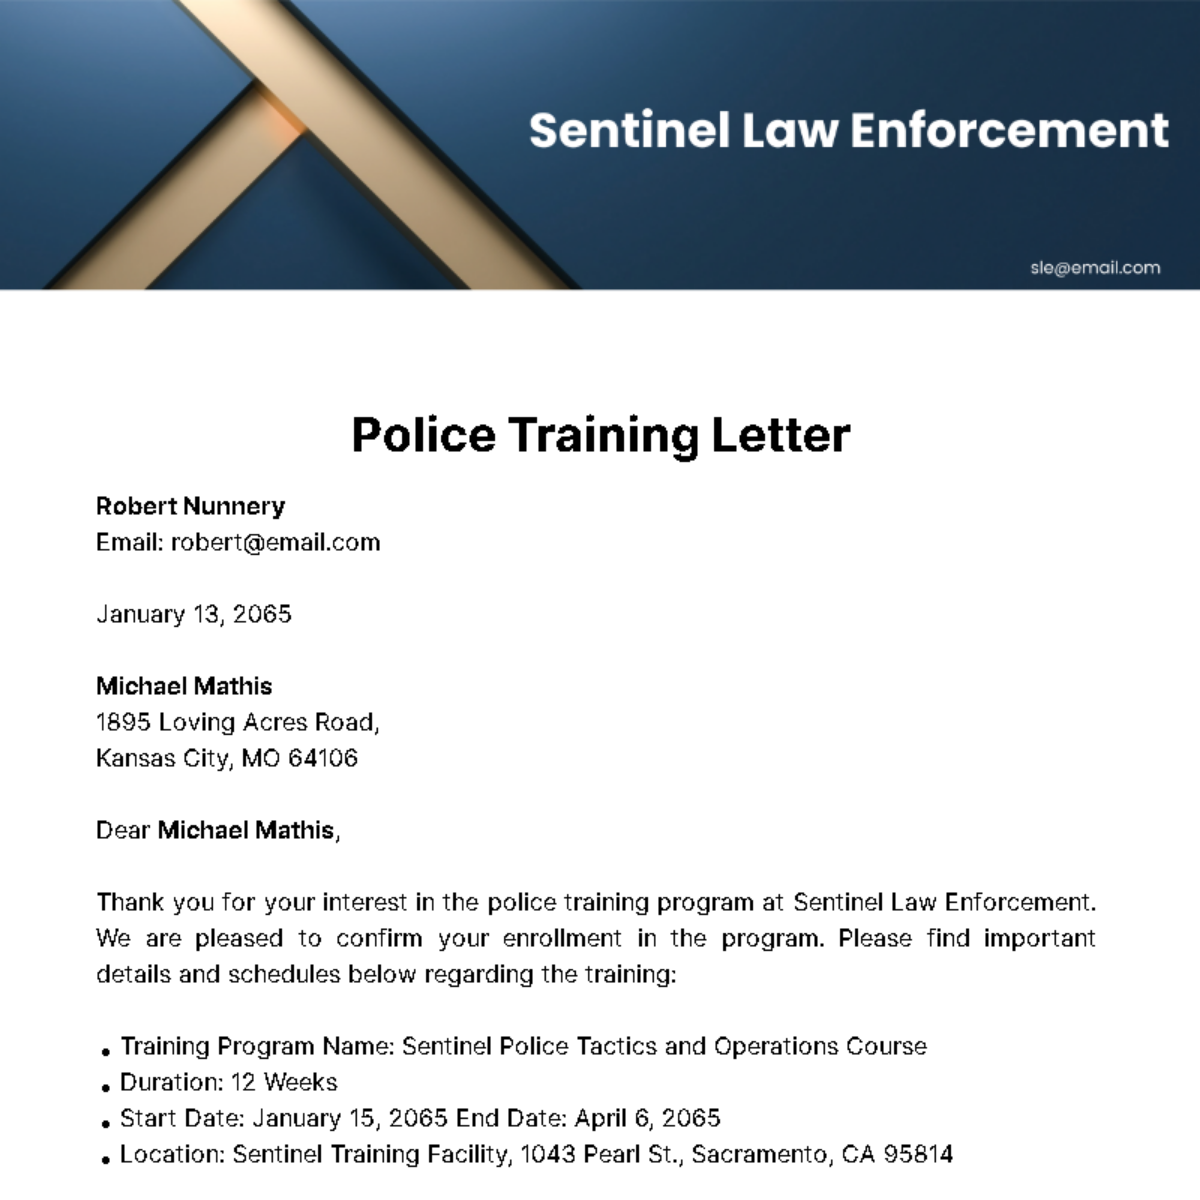 Police Training Letter Template